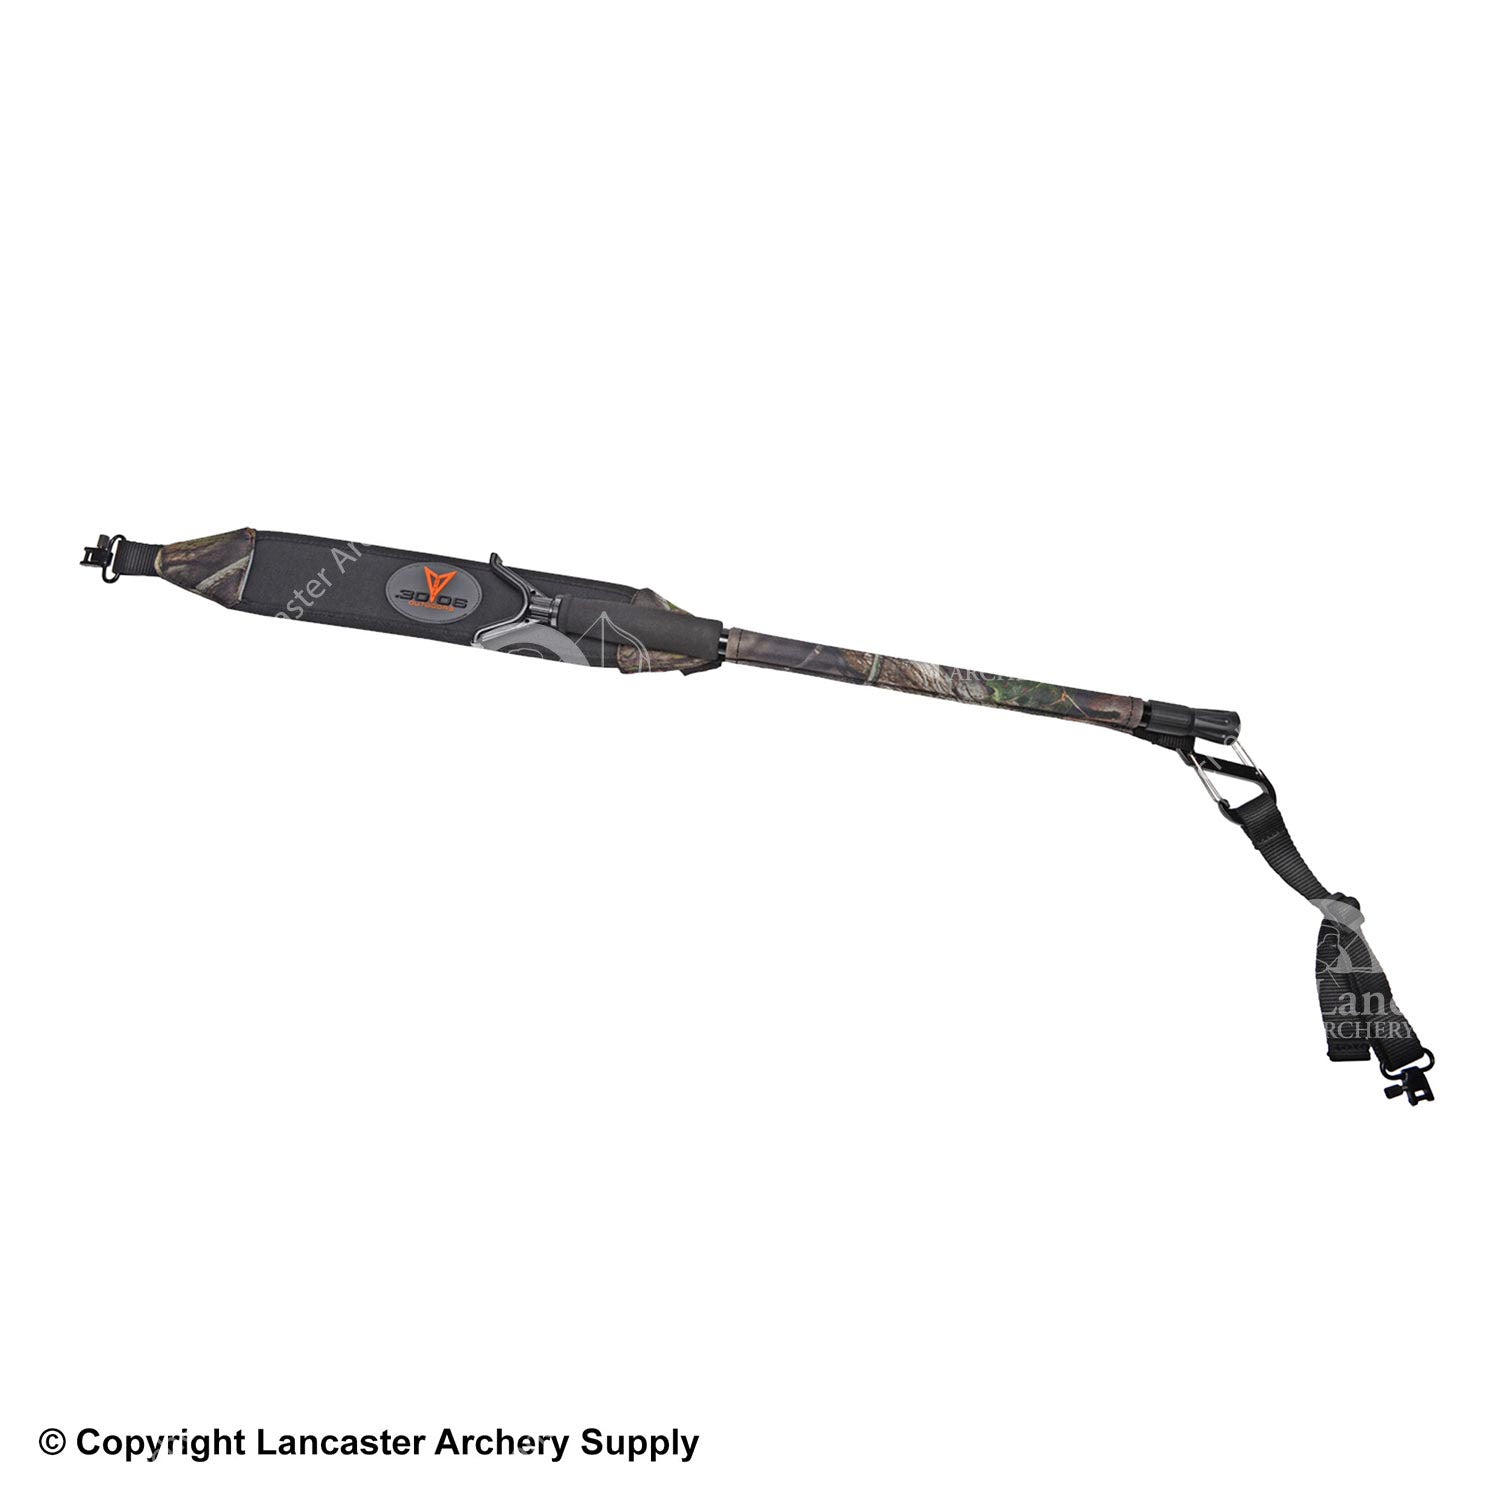 A camo shooting stick used to set and steady crossbows for shooting.